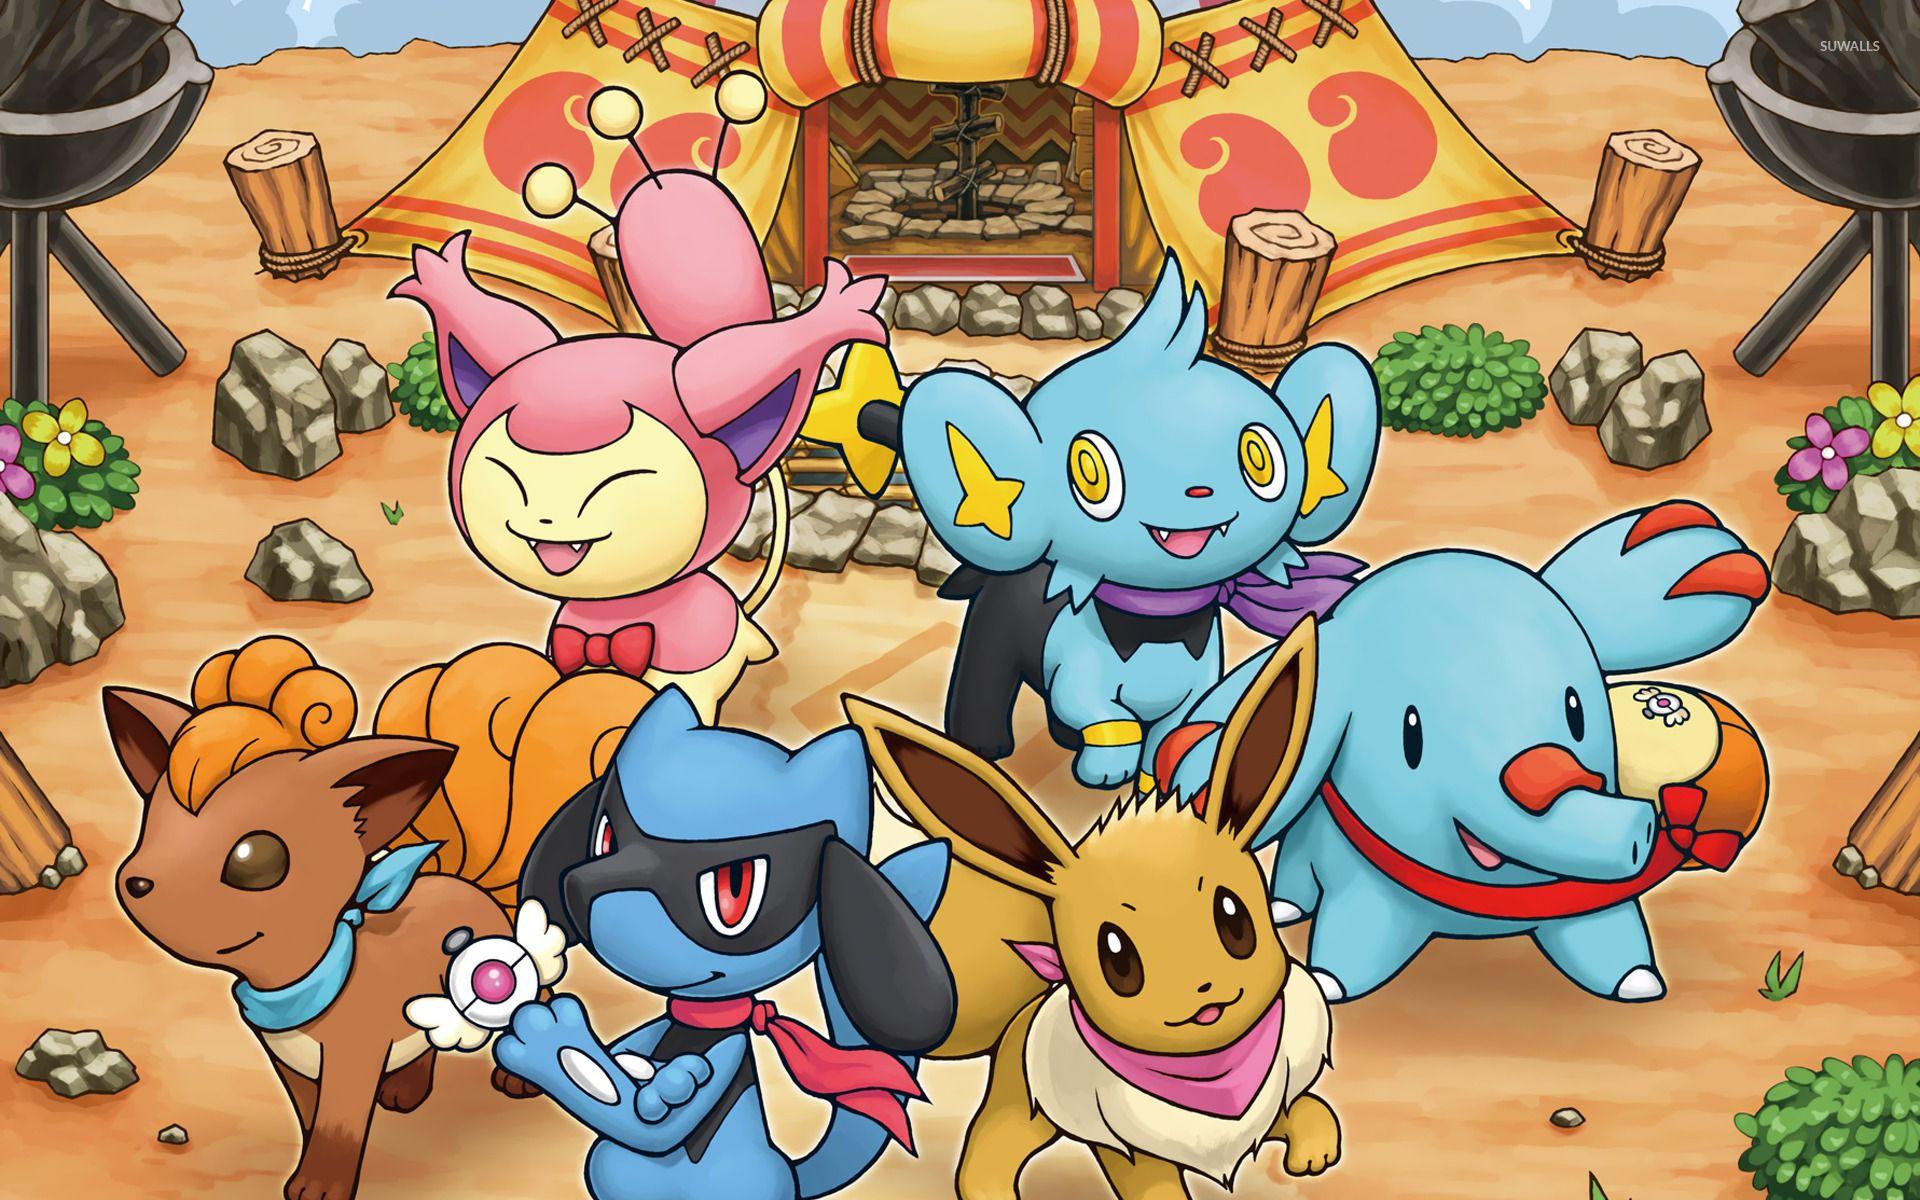 Pokemon Mystery Dungeon Wallpapers  Wallpaper Cave